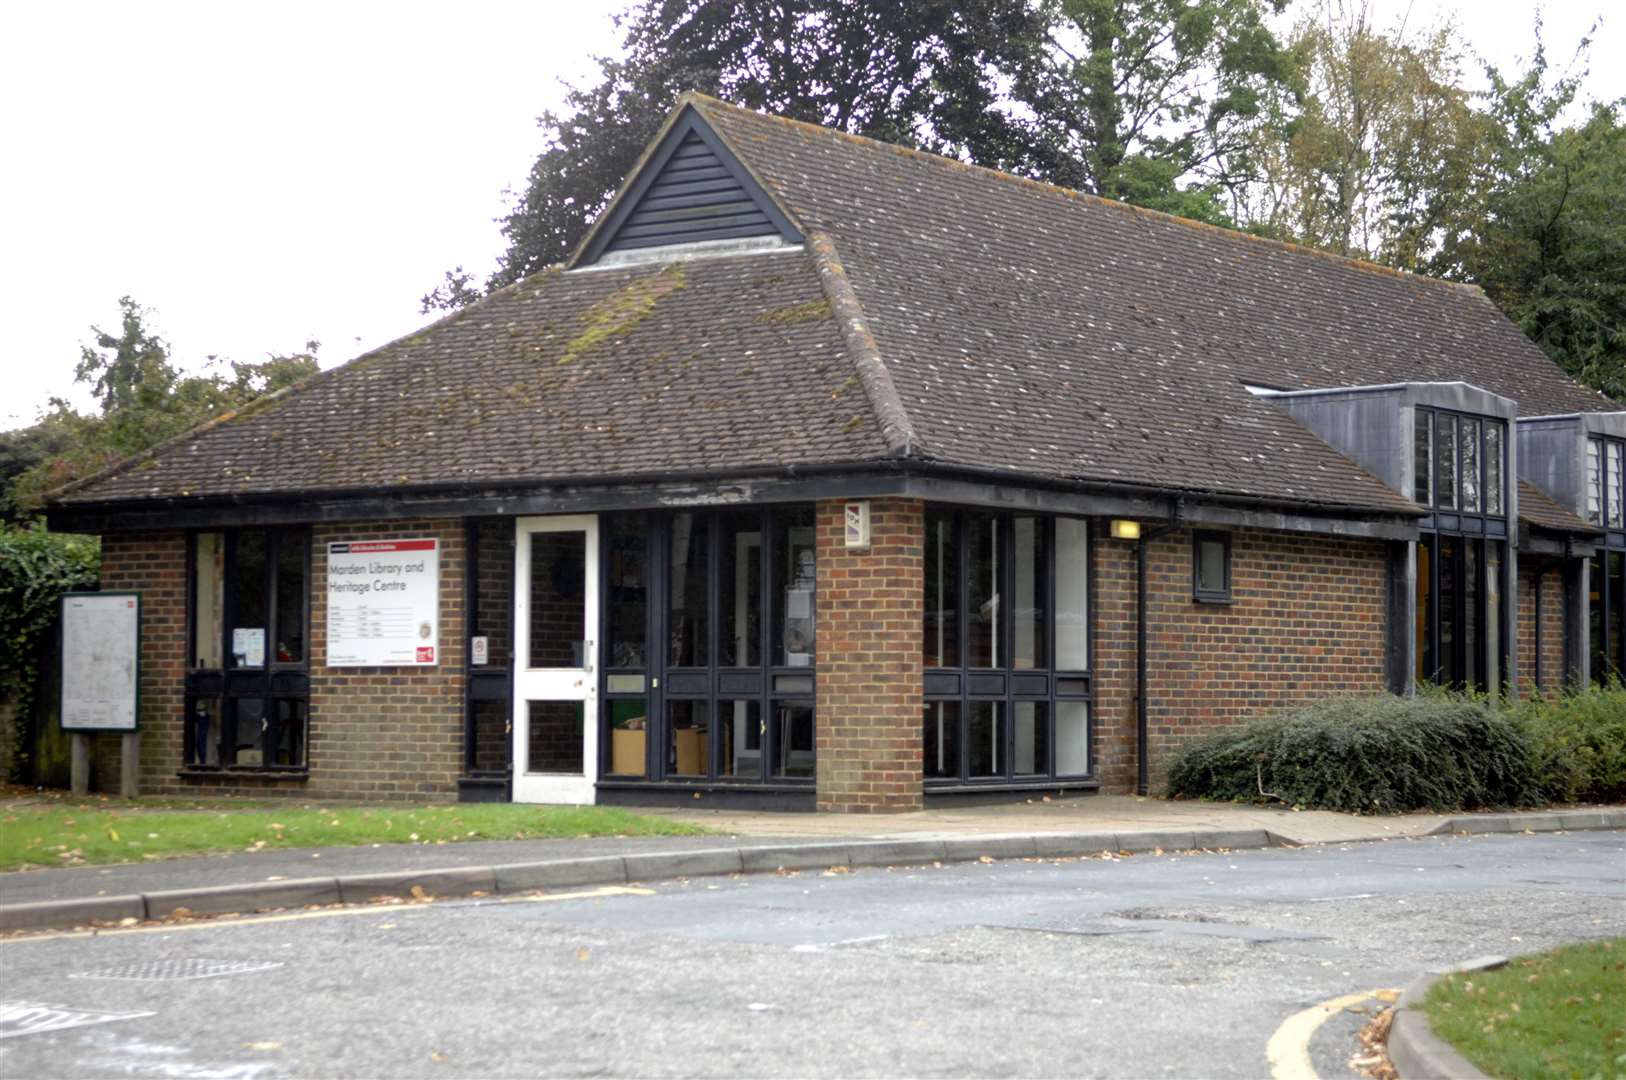 Cllr Eric Hotson sought assurances over the future of Marden Library